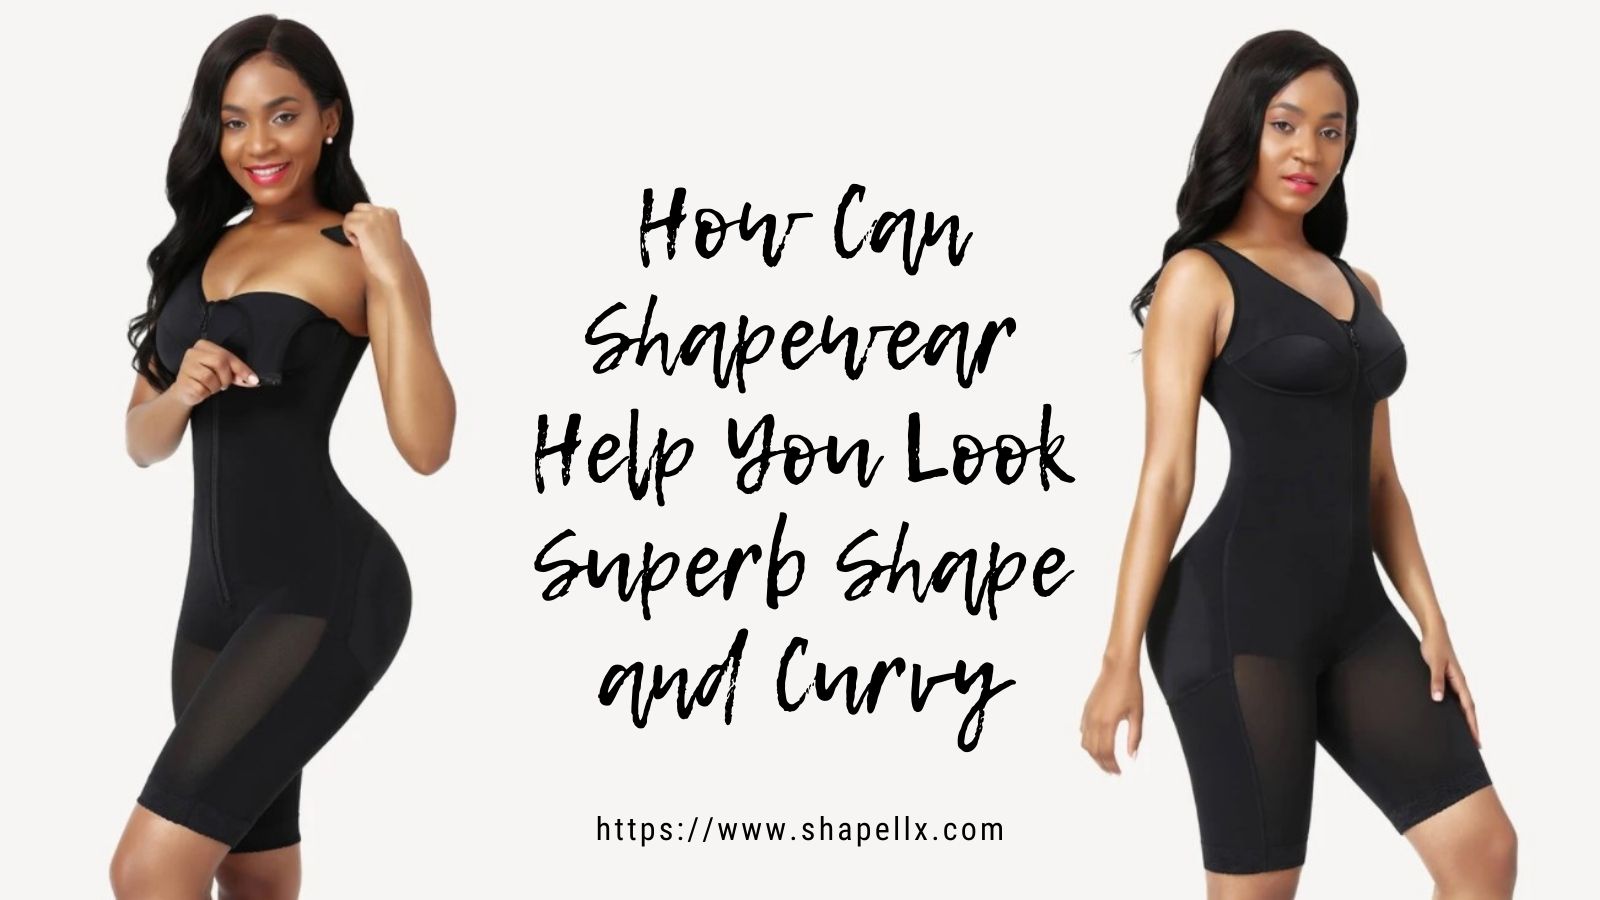 How Can Shapewear Help You Look Superb Shape and Curvy